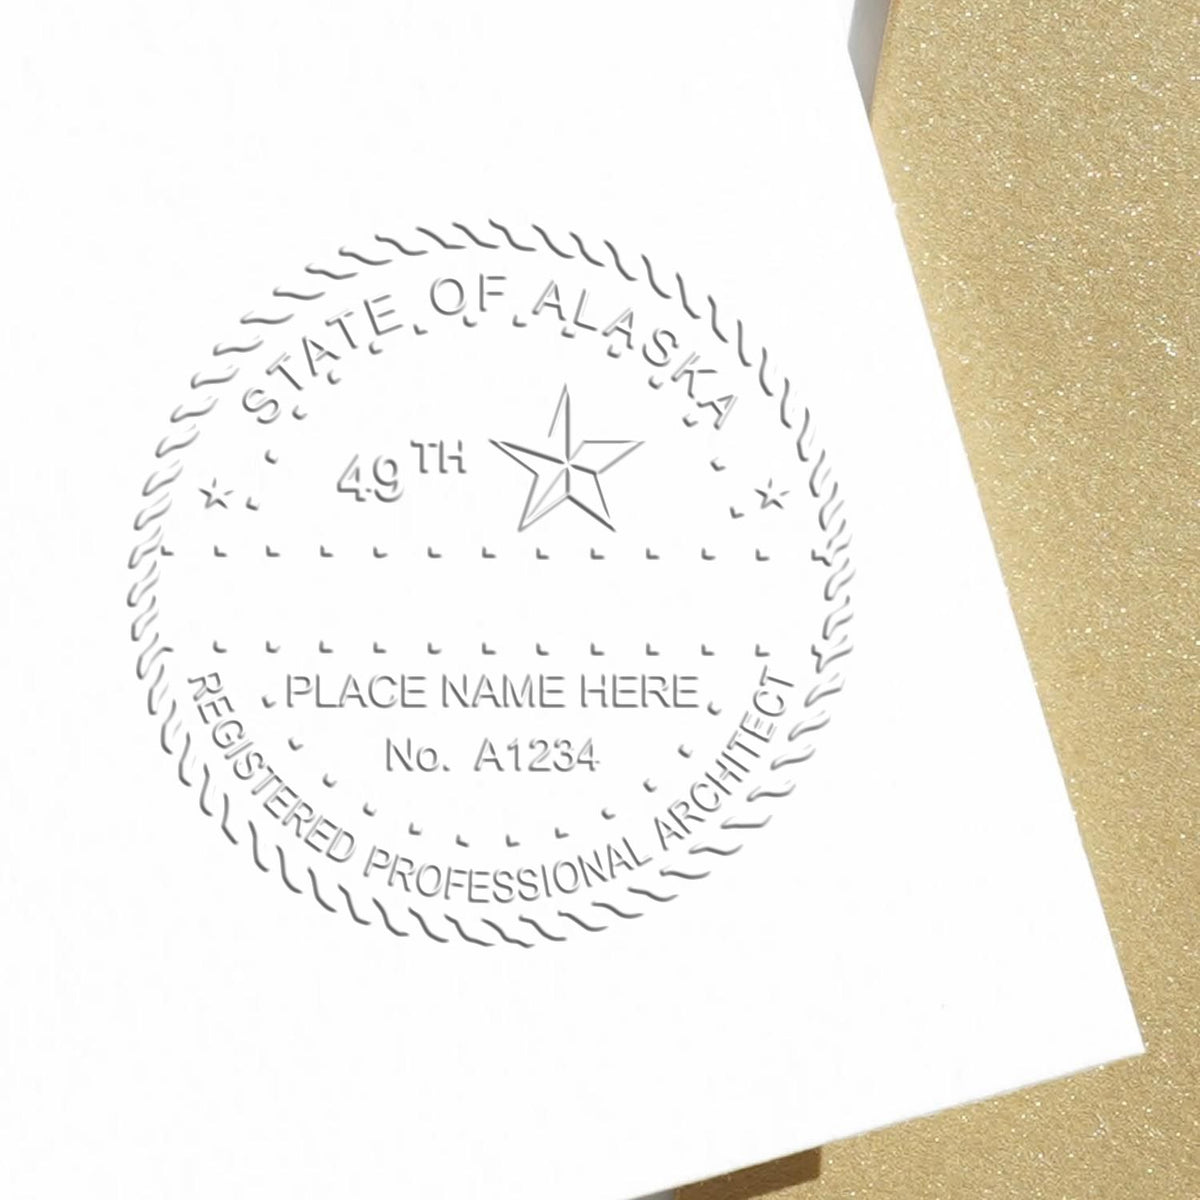 A lifestyle photo showing a stamped image of the Alaska Desk Architect Embossing Seal on a piece of paper